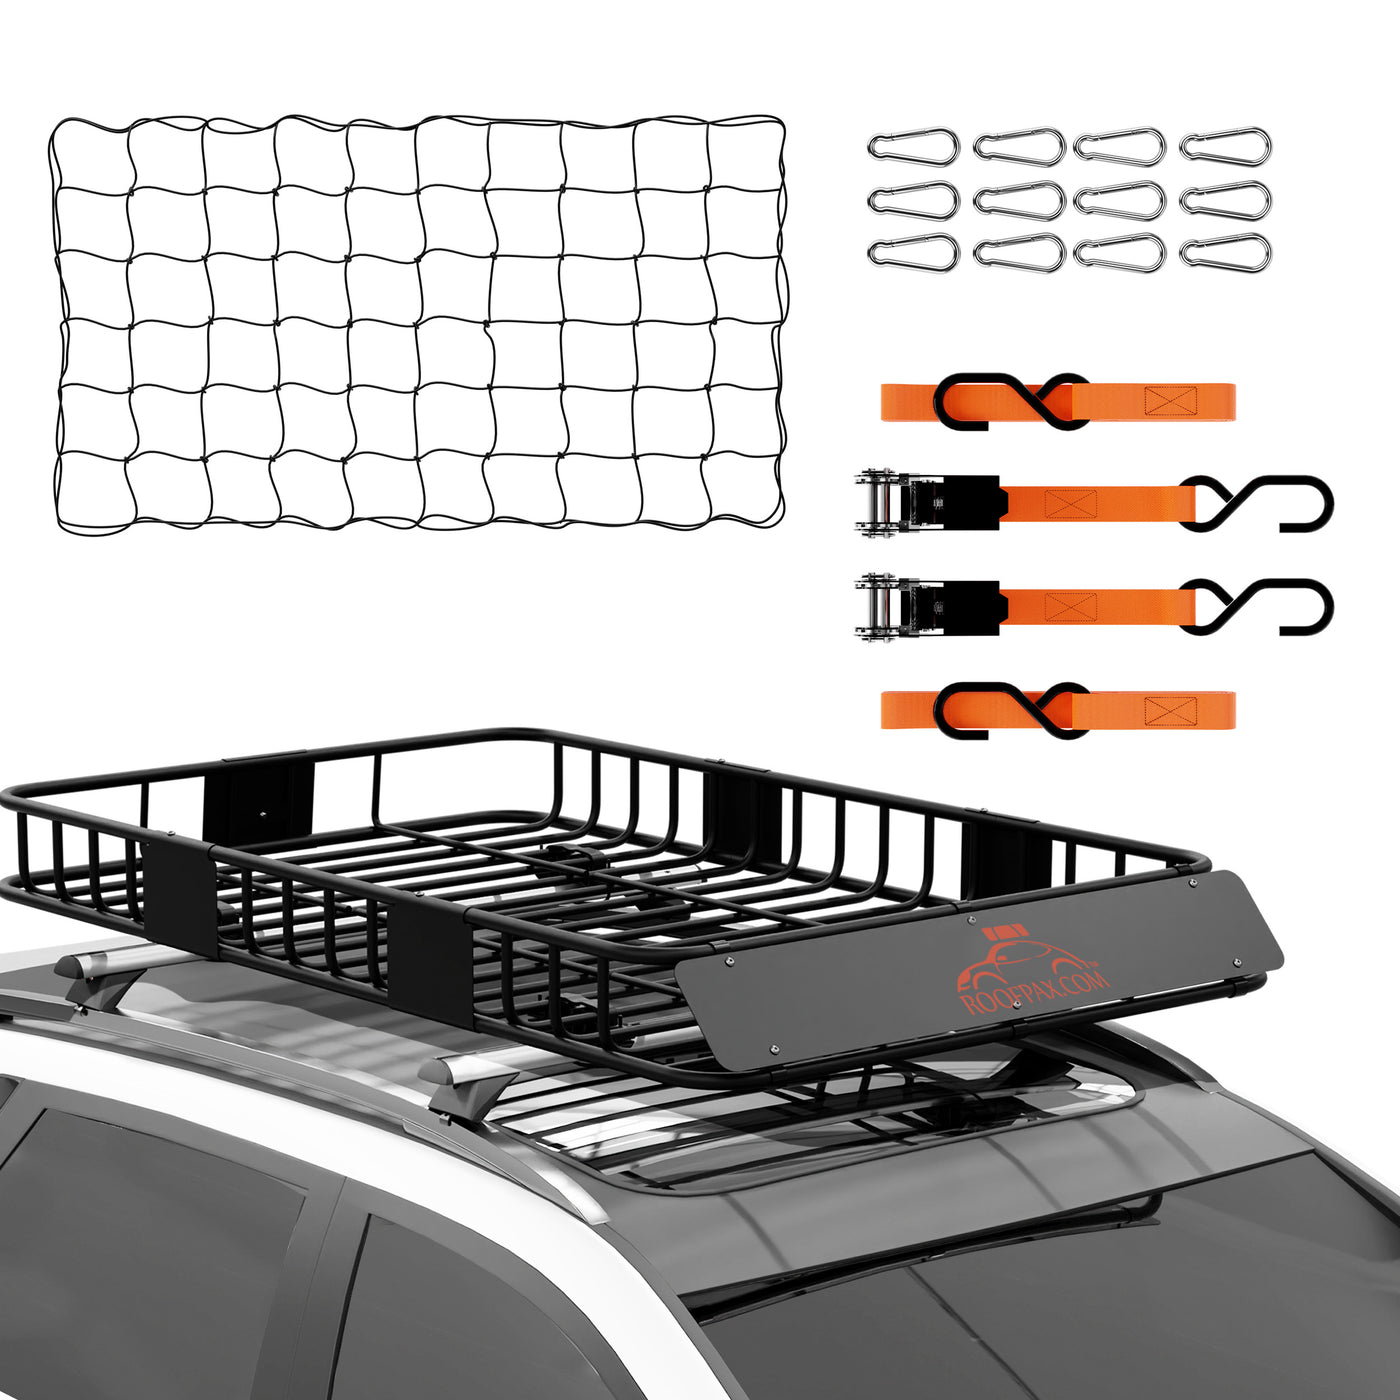 With a spacious capacity of up to 19 cubic feet, RoofPax carriers provide ample room for all your travel essentials.